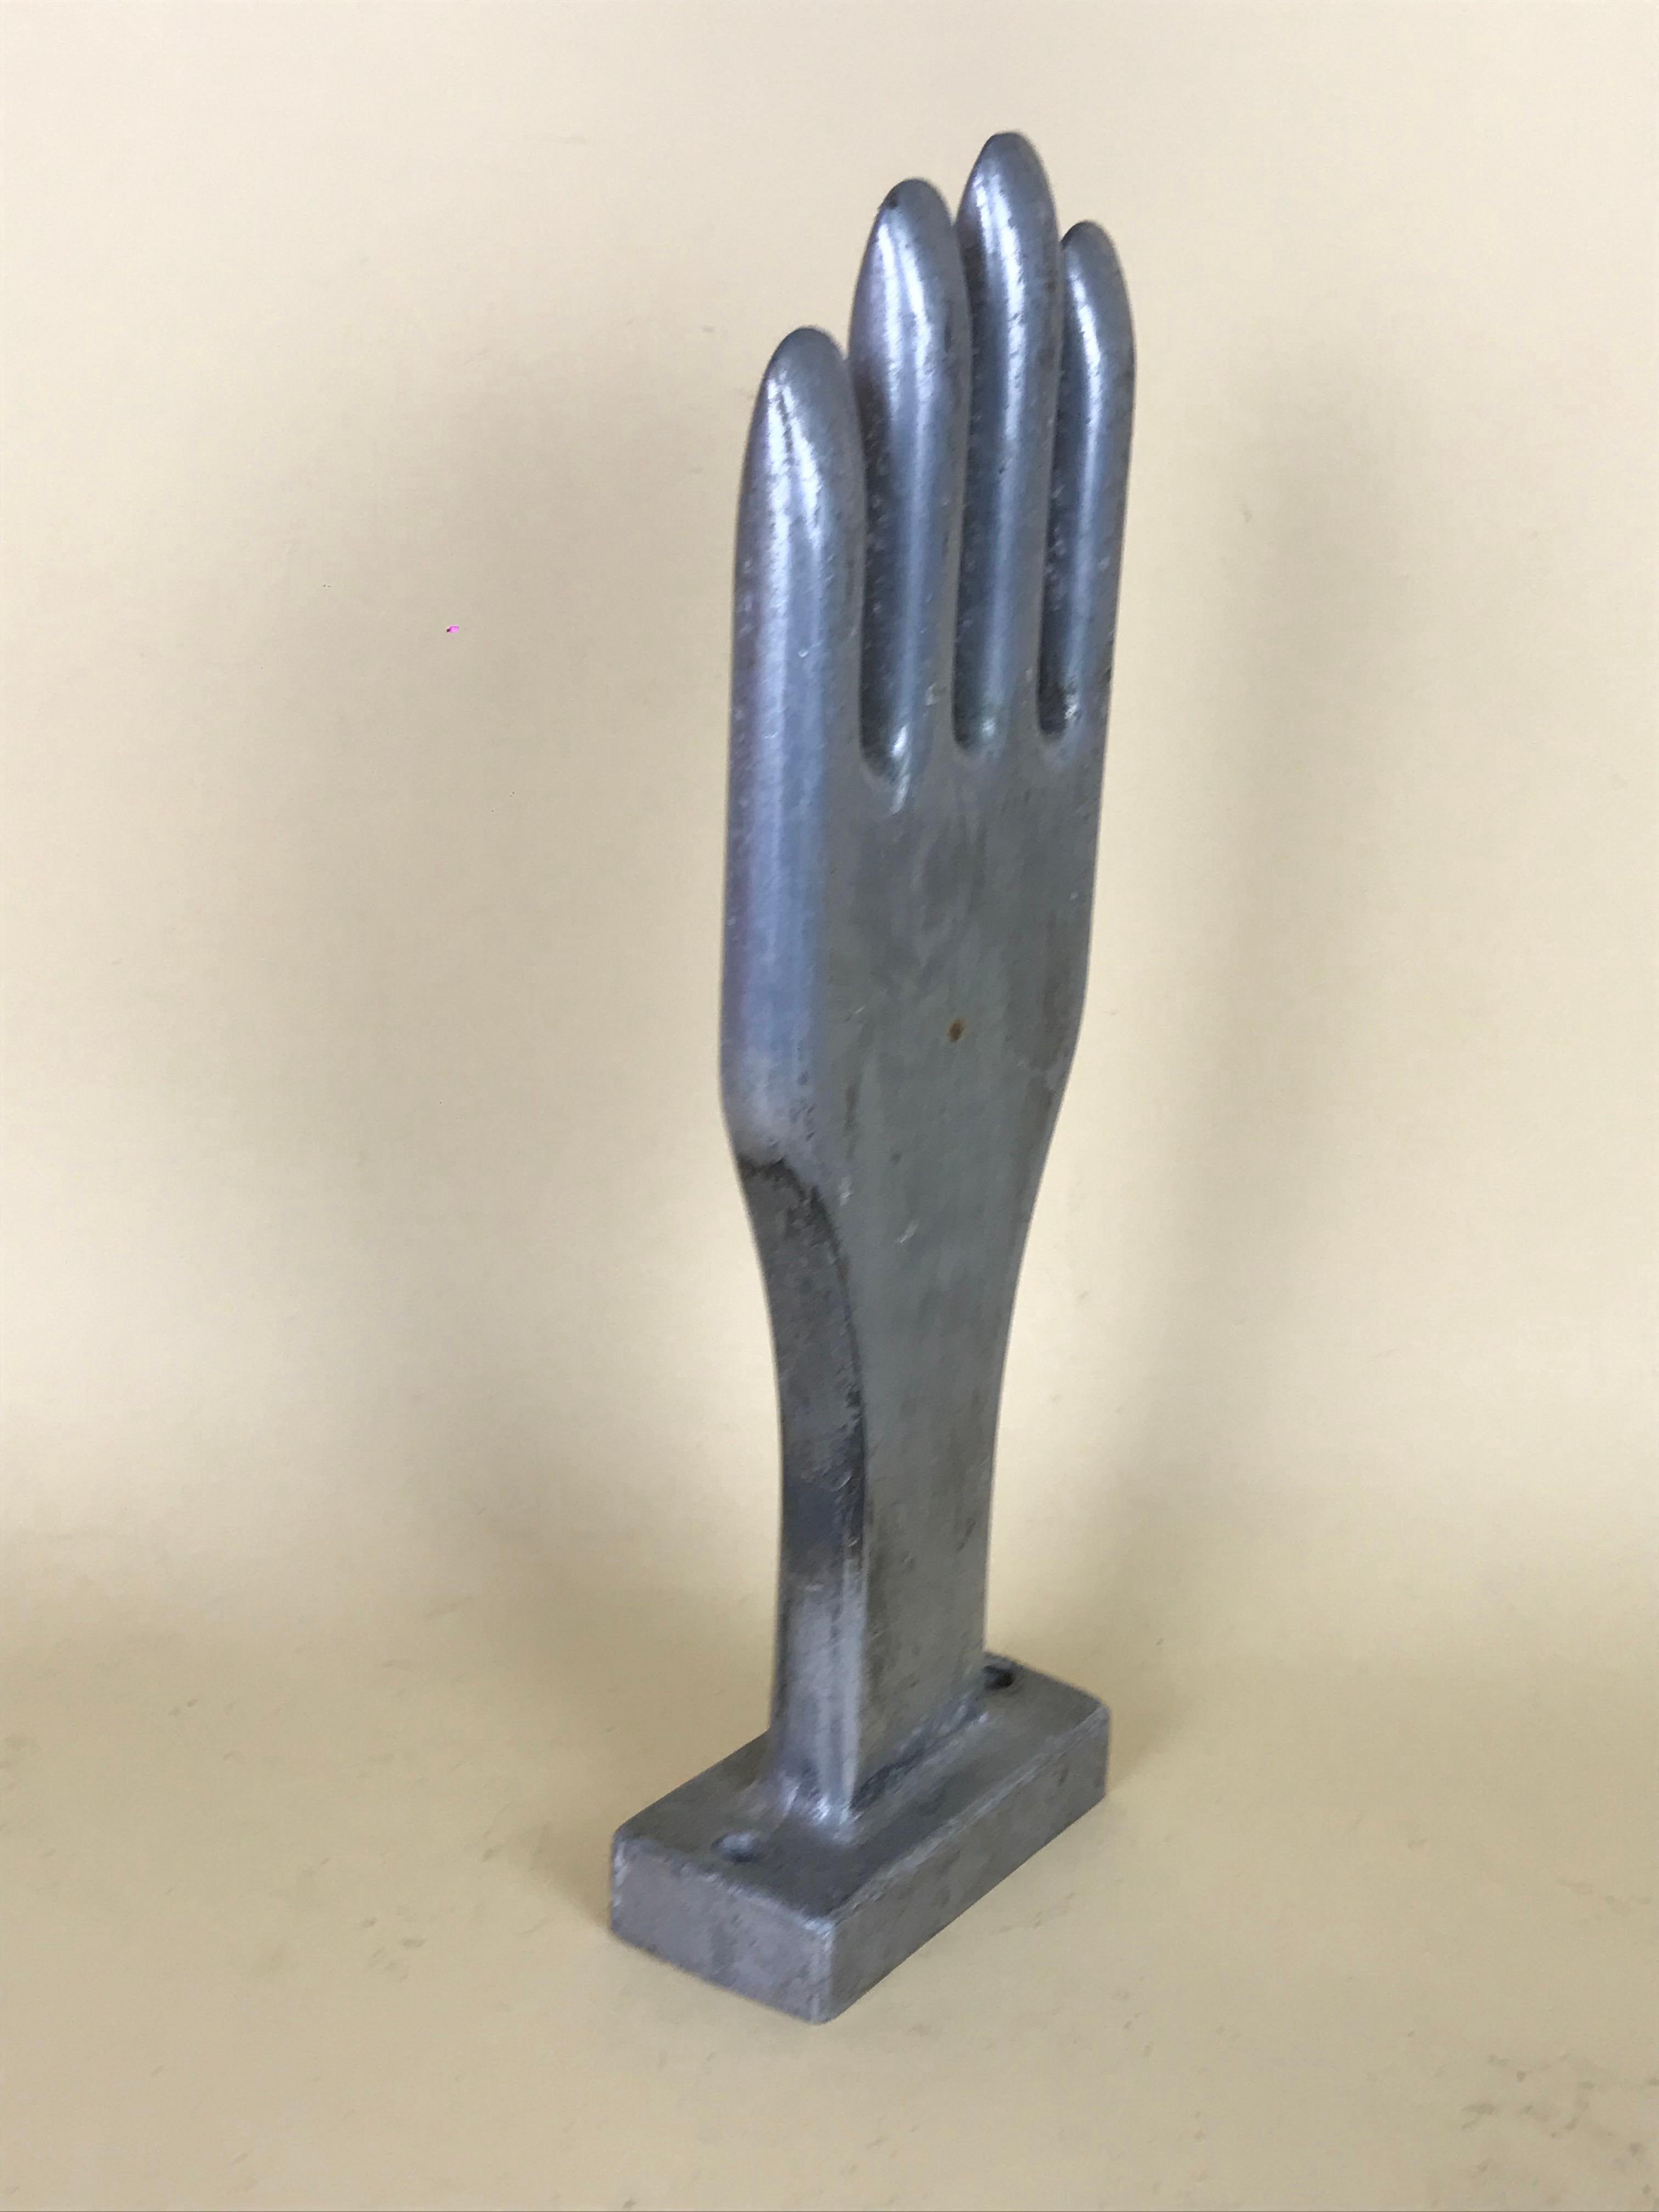 1950s Vintage French Freestanding Aluminium Industrial Leather Glove Mold 3